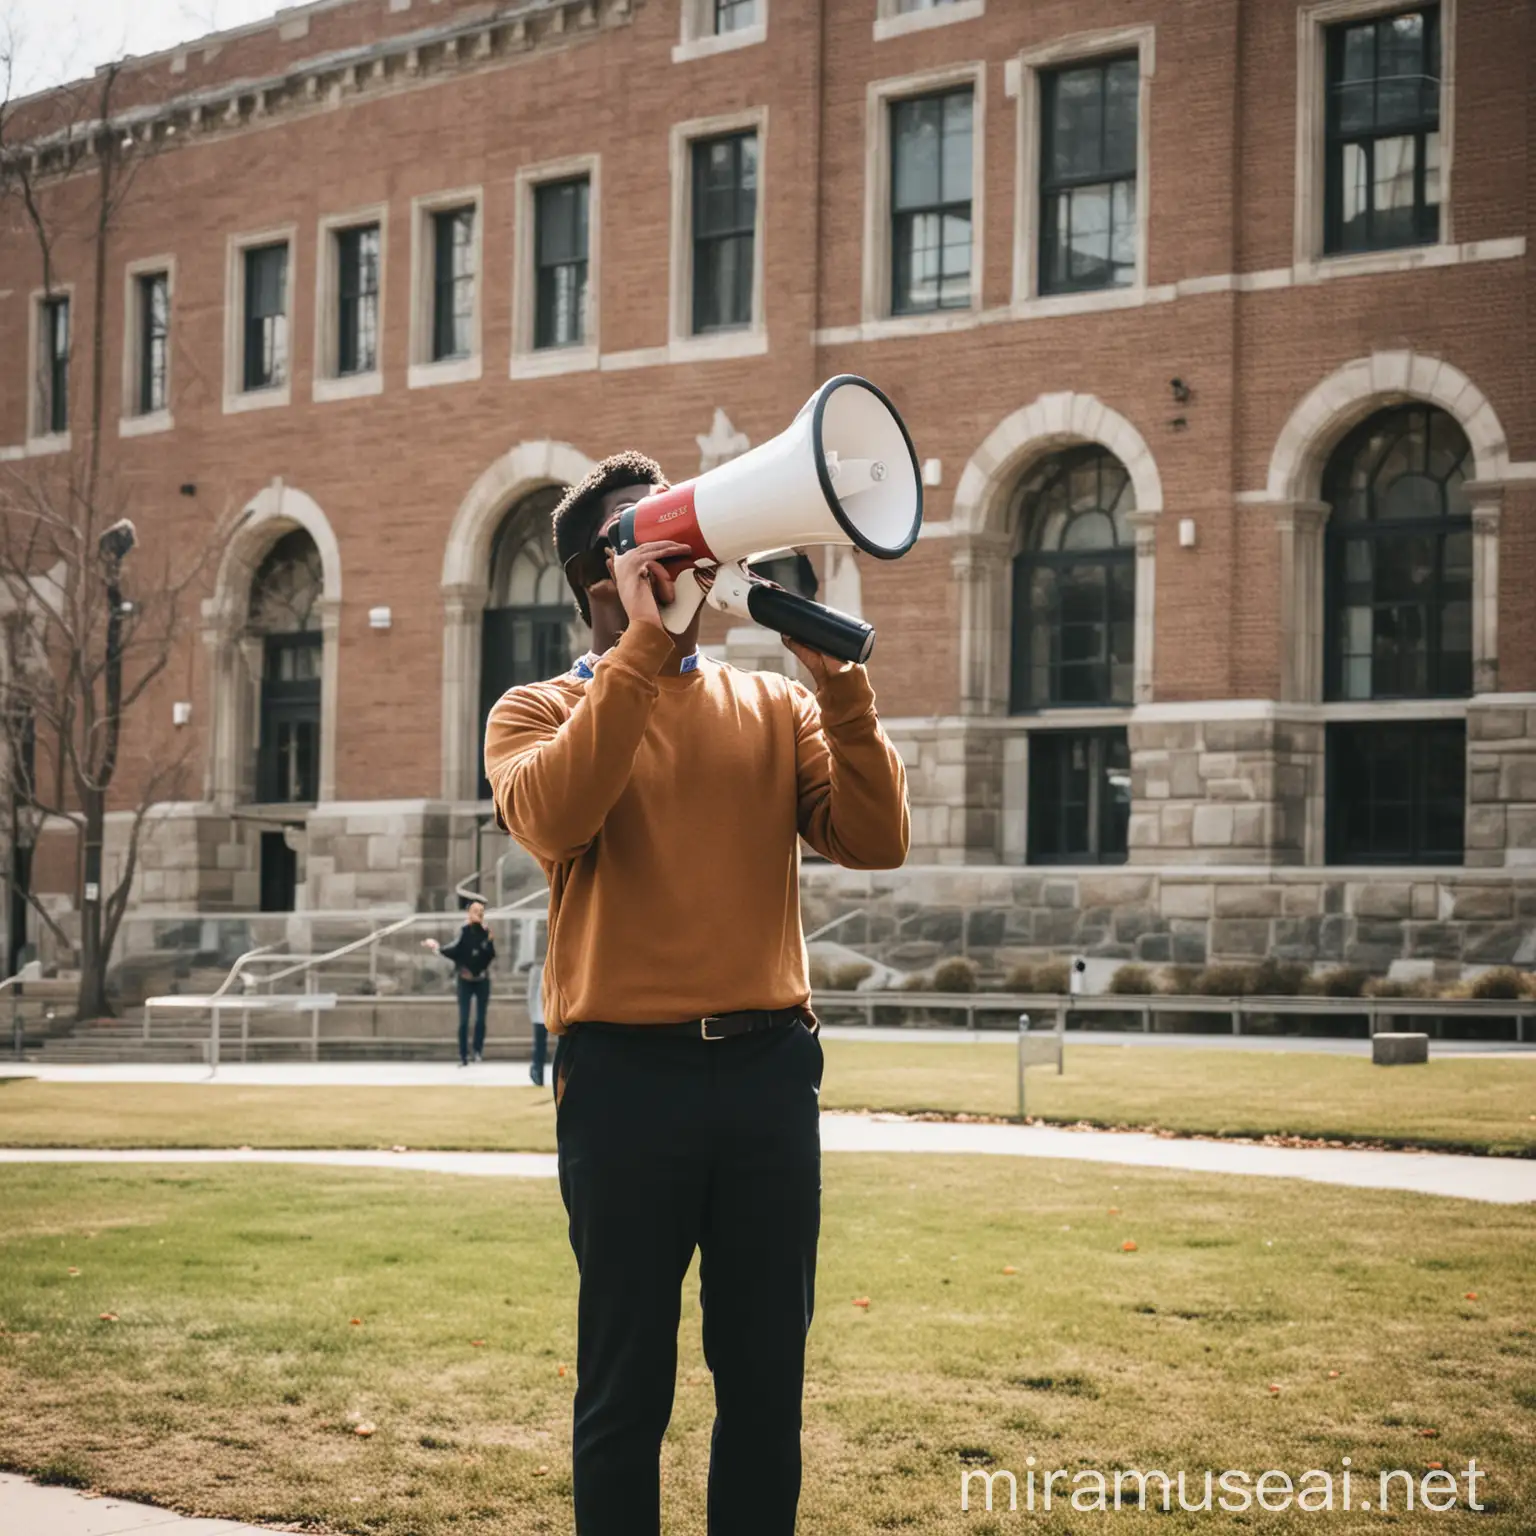 Person with megaphone on a college campus